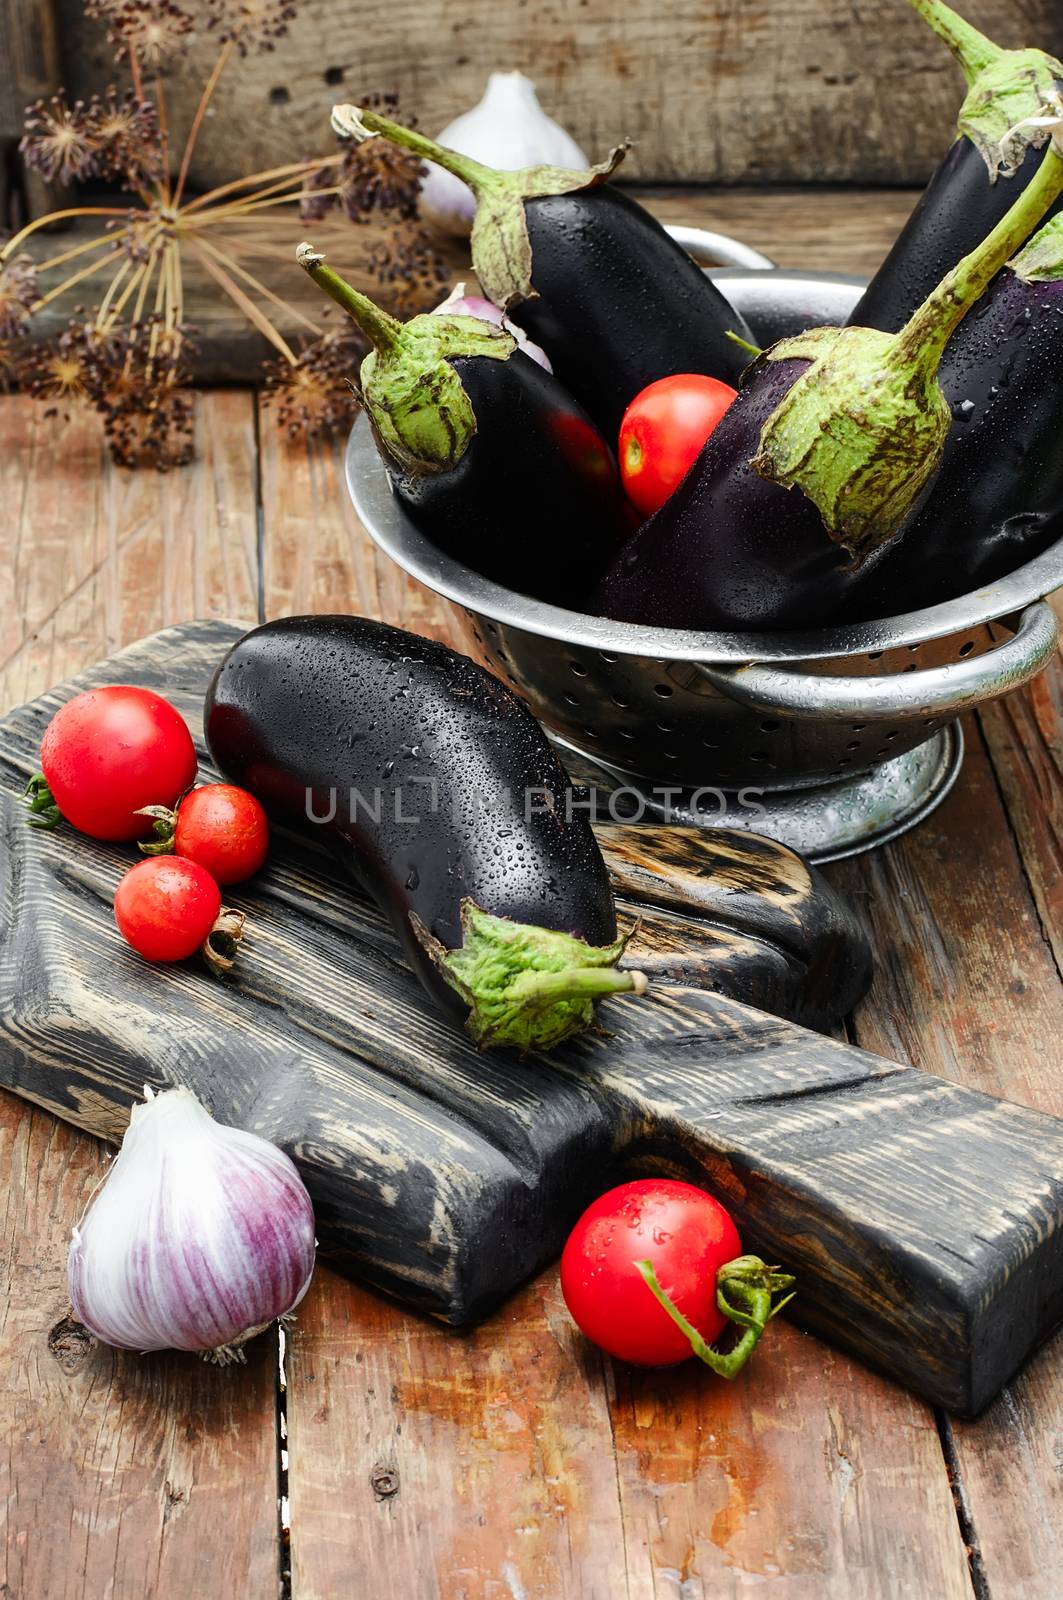 Harvest summer vegetables eggplant on wooden background in rustic style